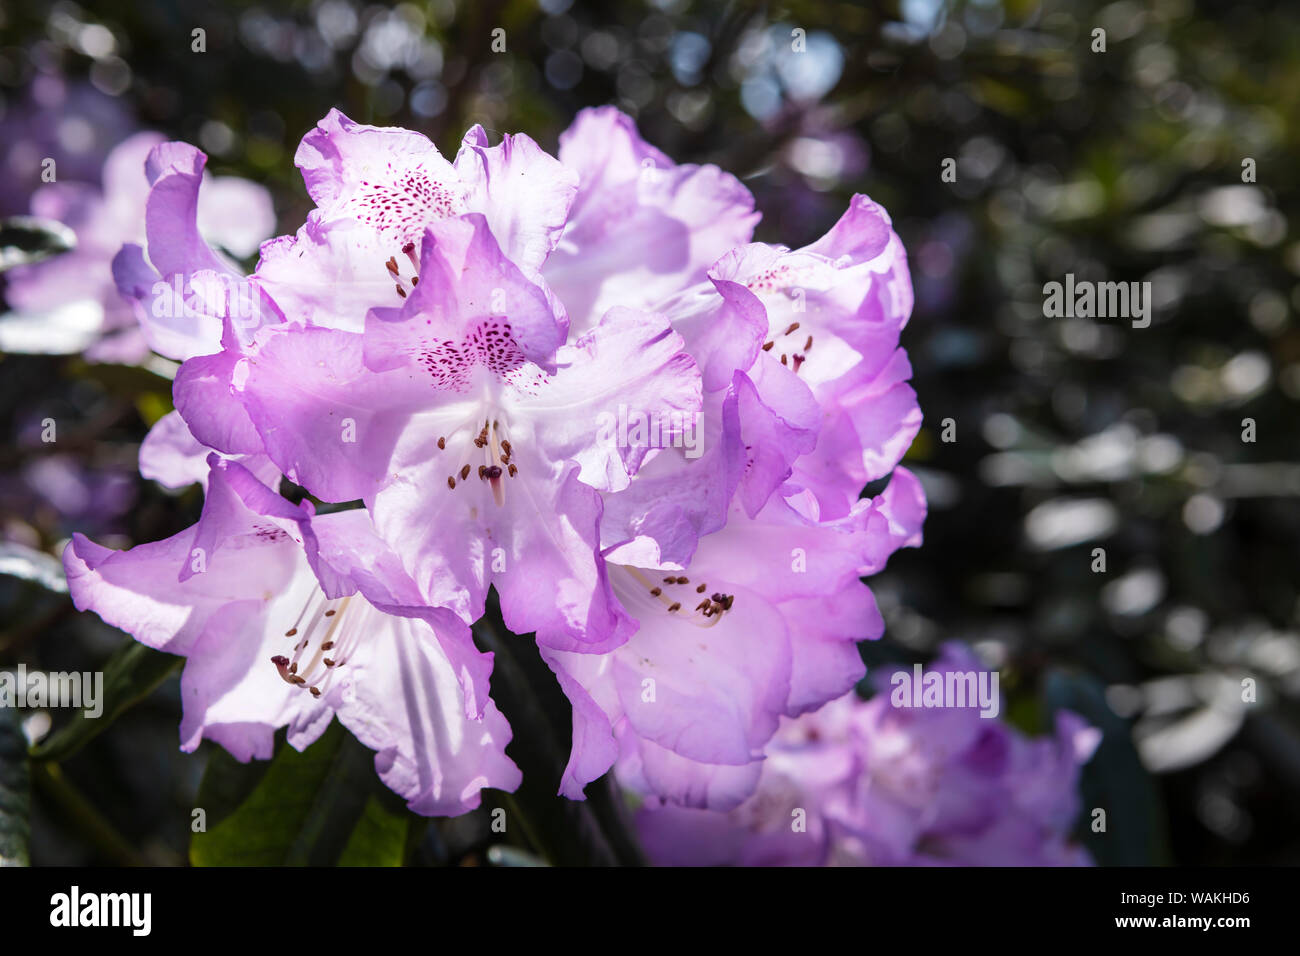 Cluster of pink magenta rhododendron flowers in full bloom close-up. Stock Photo